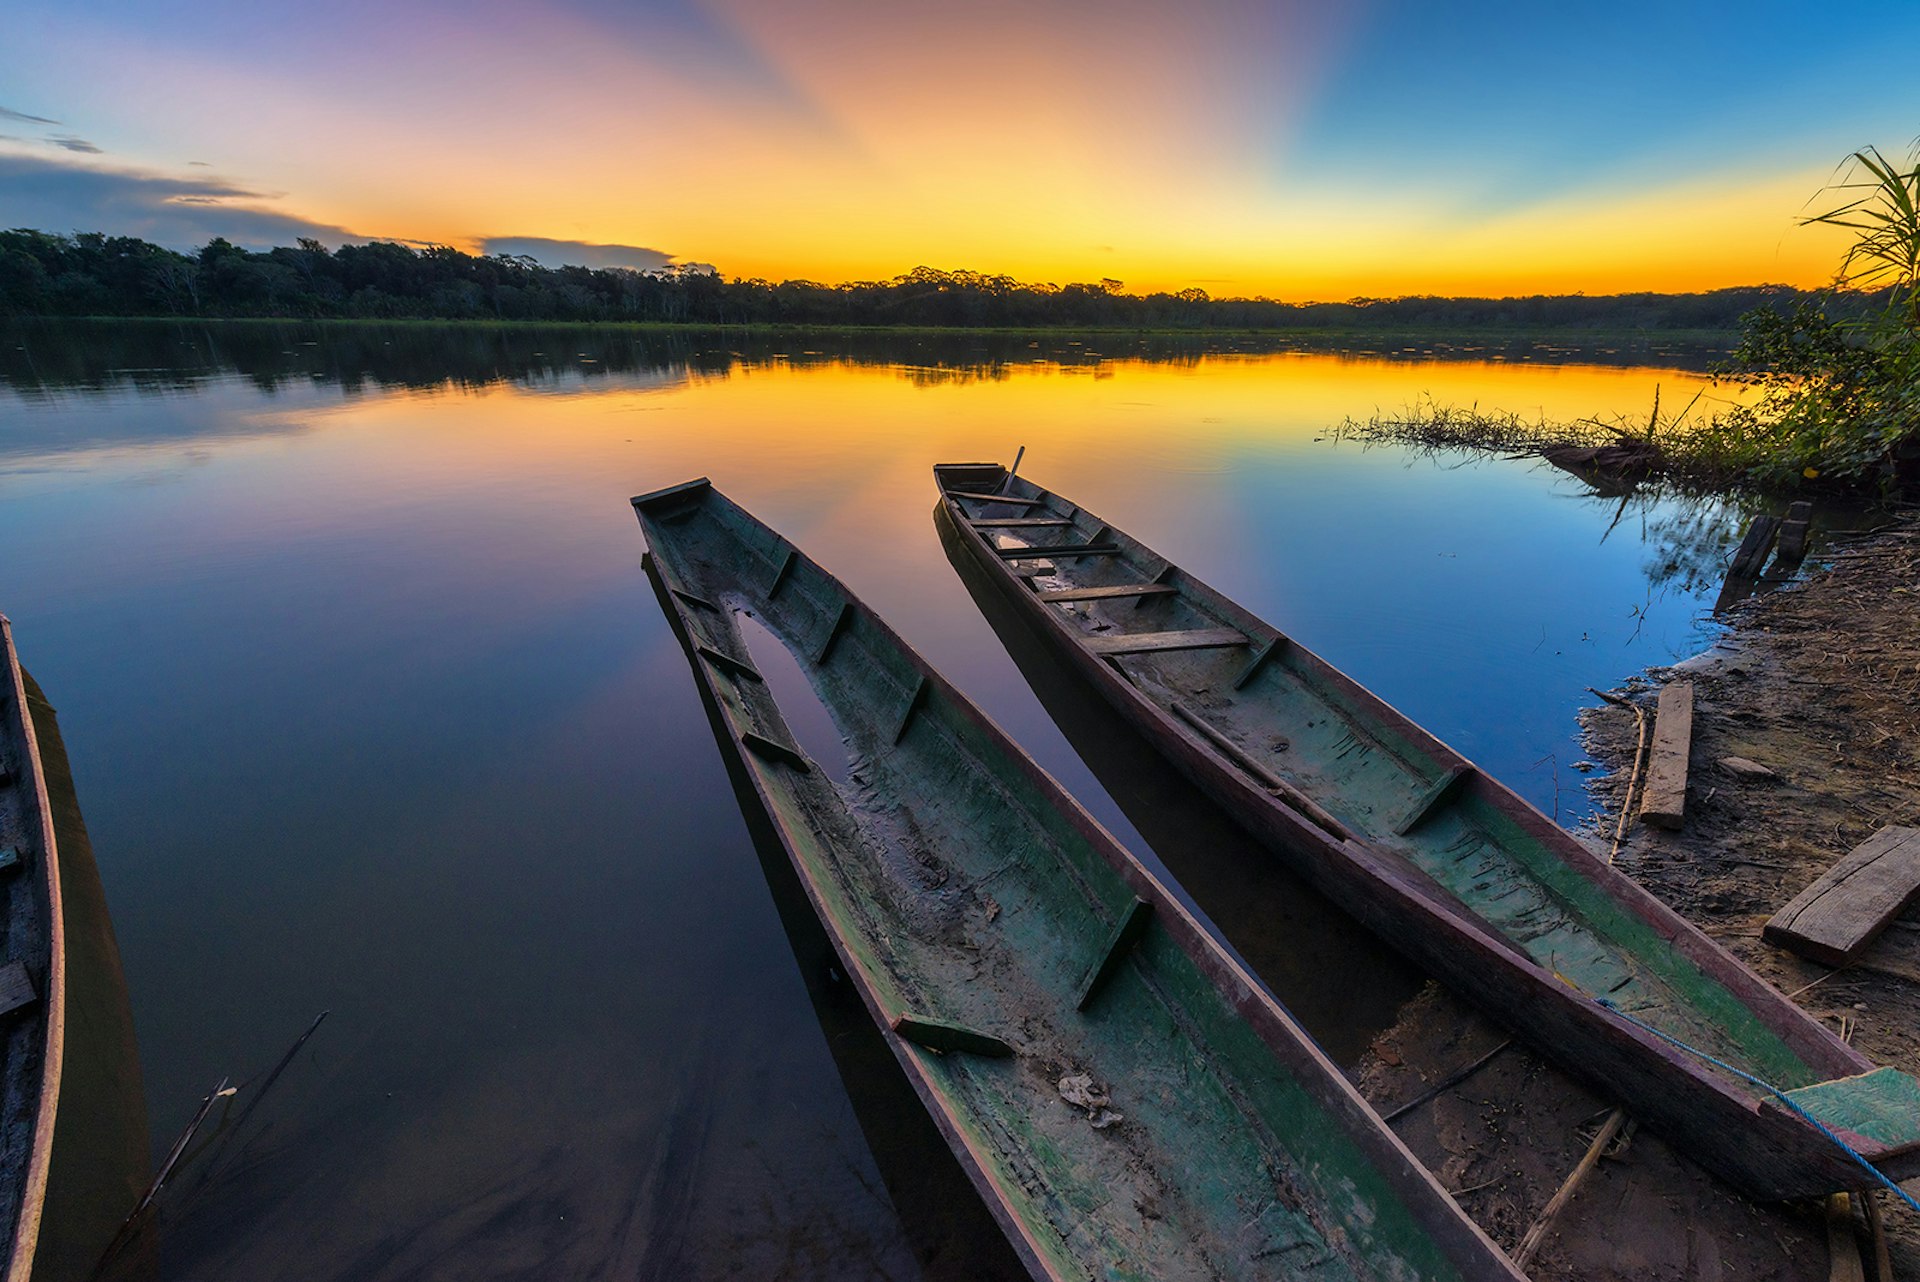 Features - Wooden Canoes Moored On Lake Against Sky During Sunset